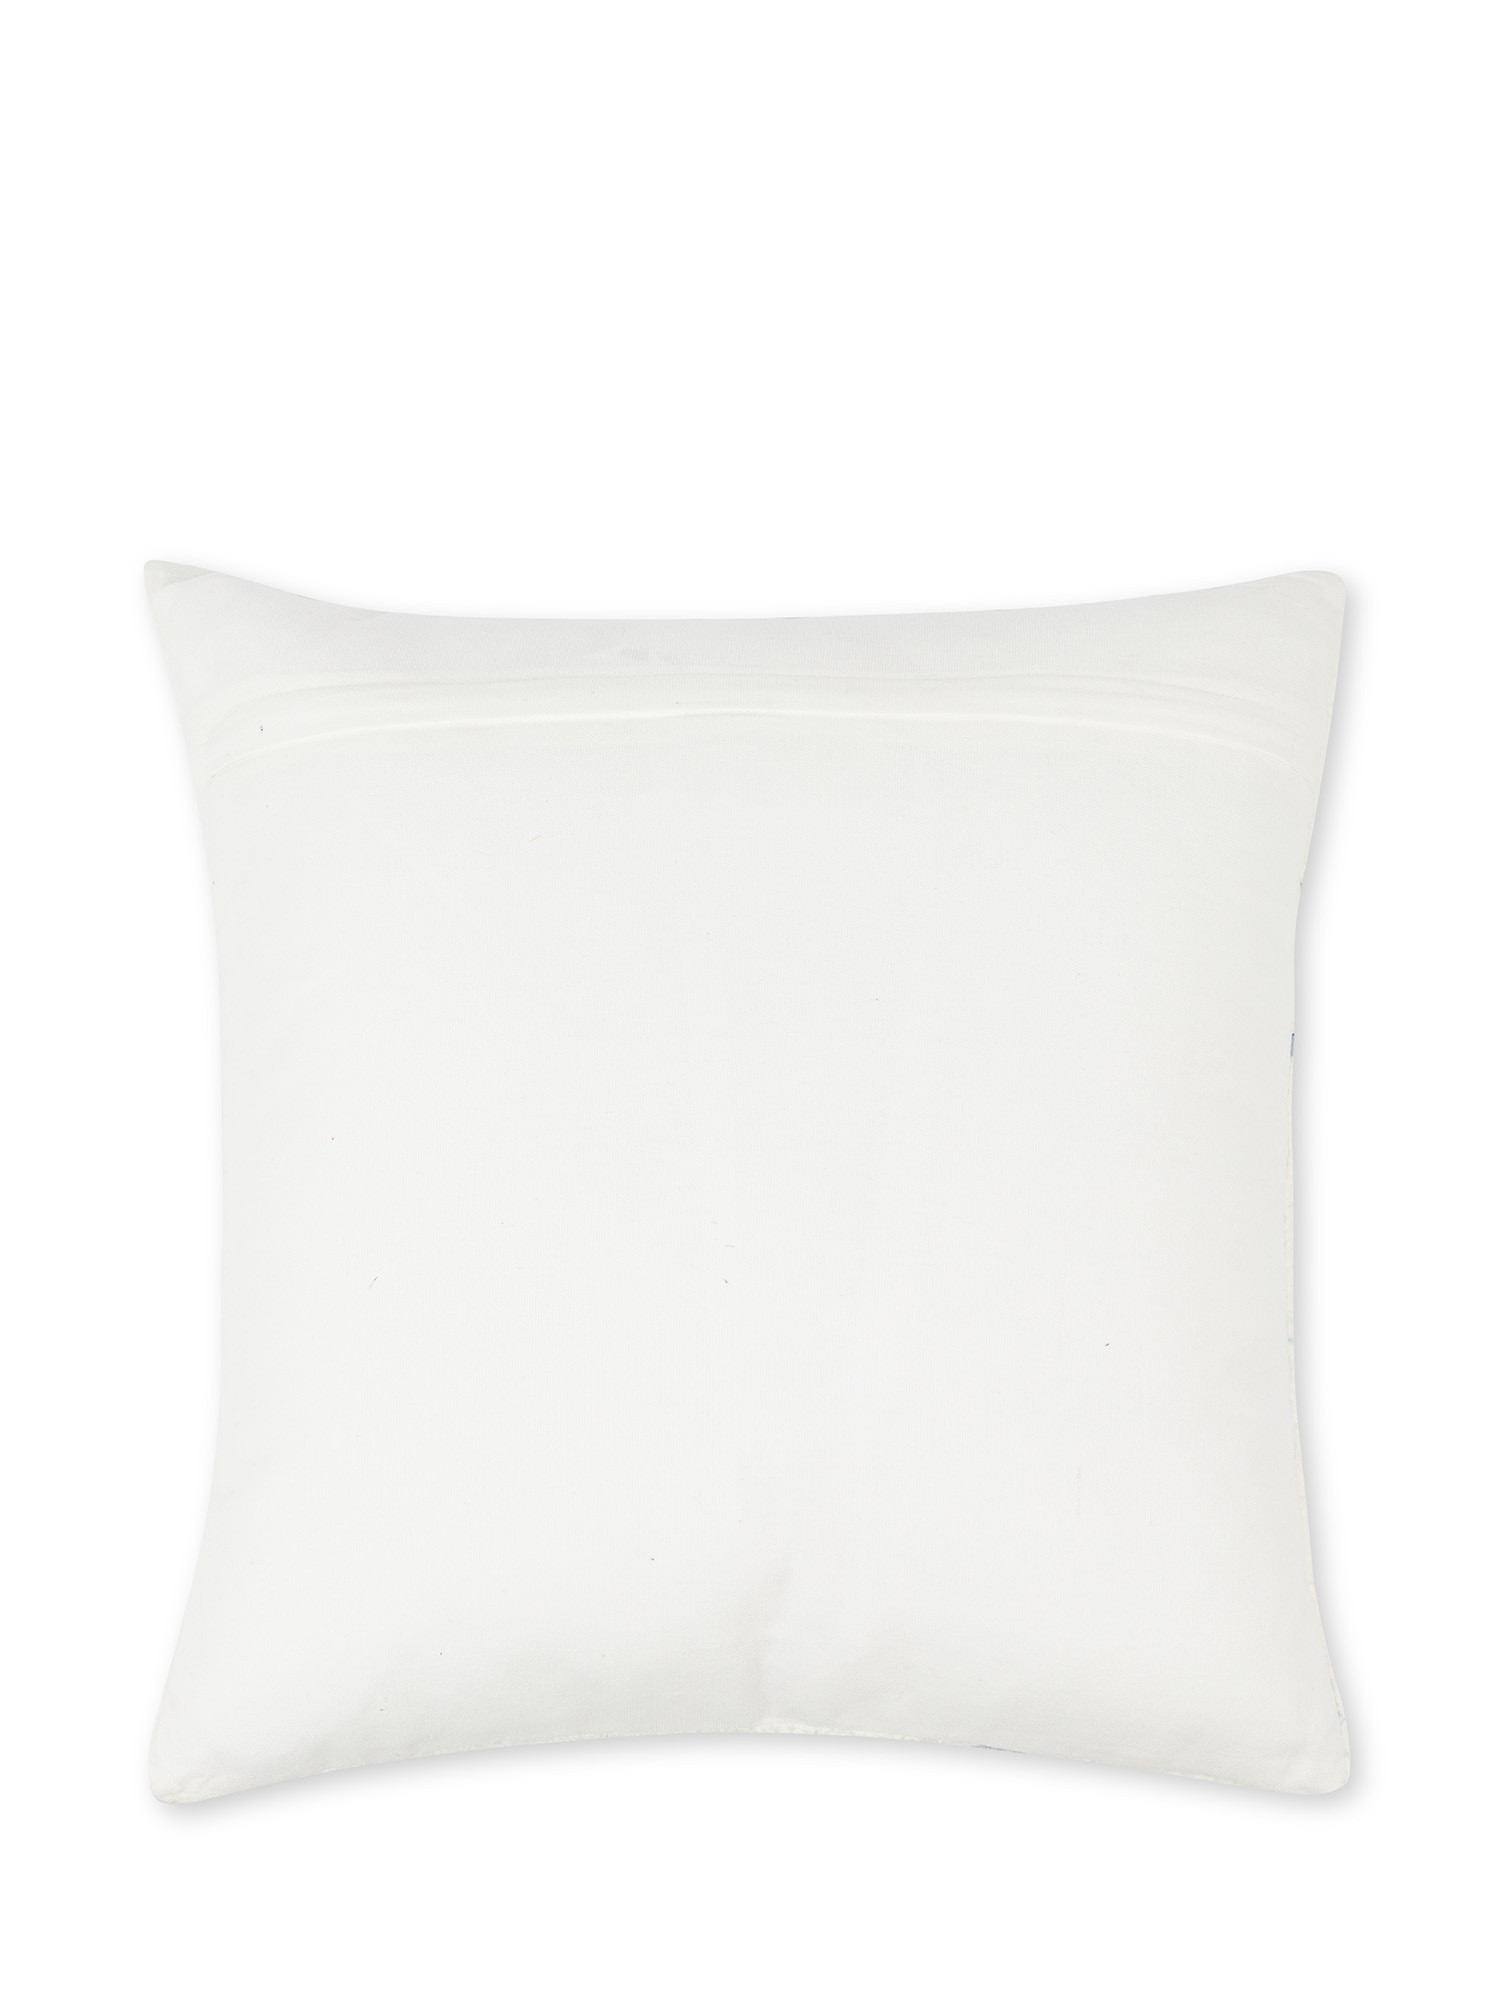 Embroidered sherpa fabric cushion 45x45cm, White, large image number 1